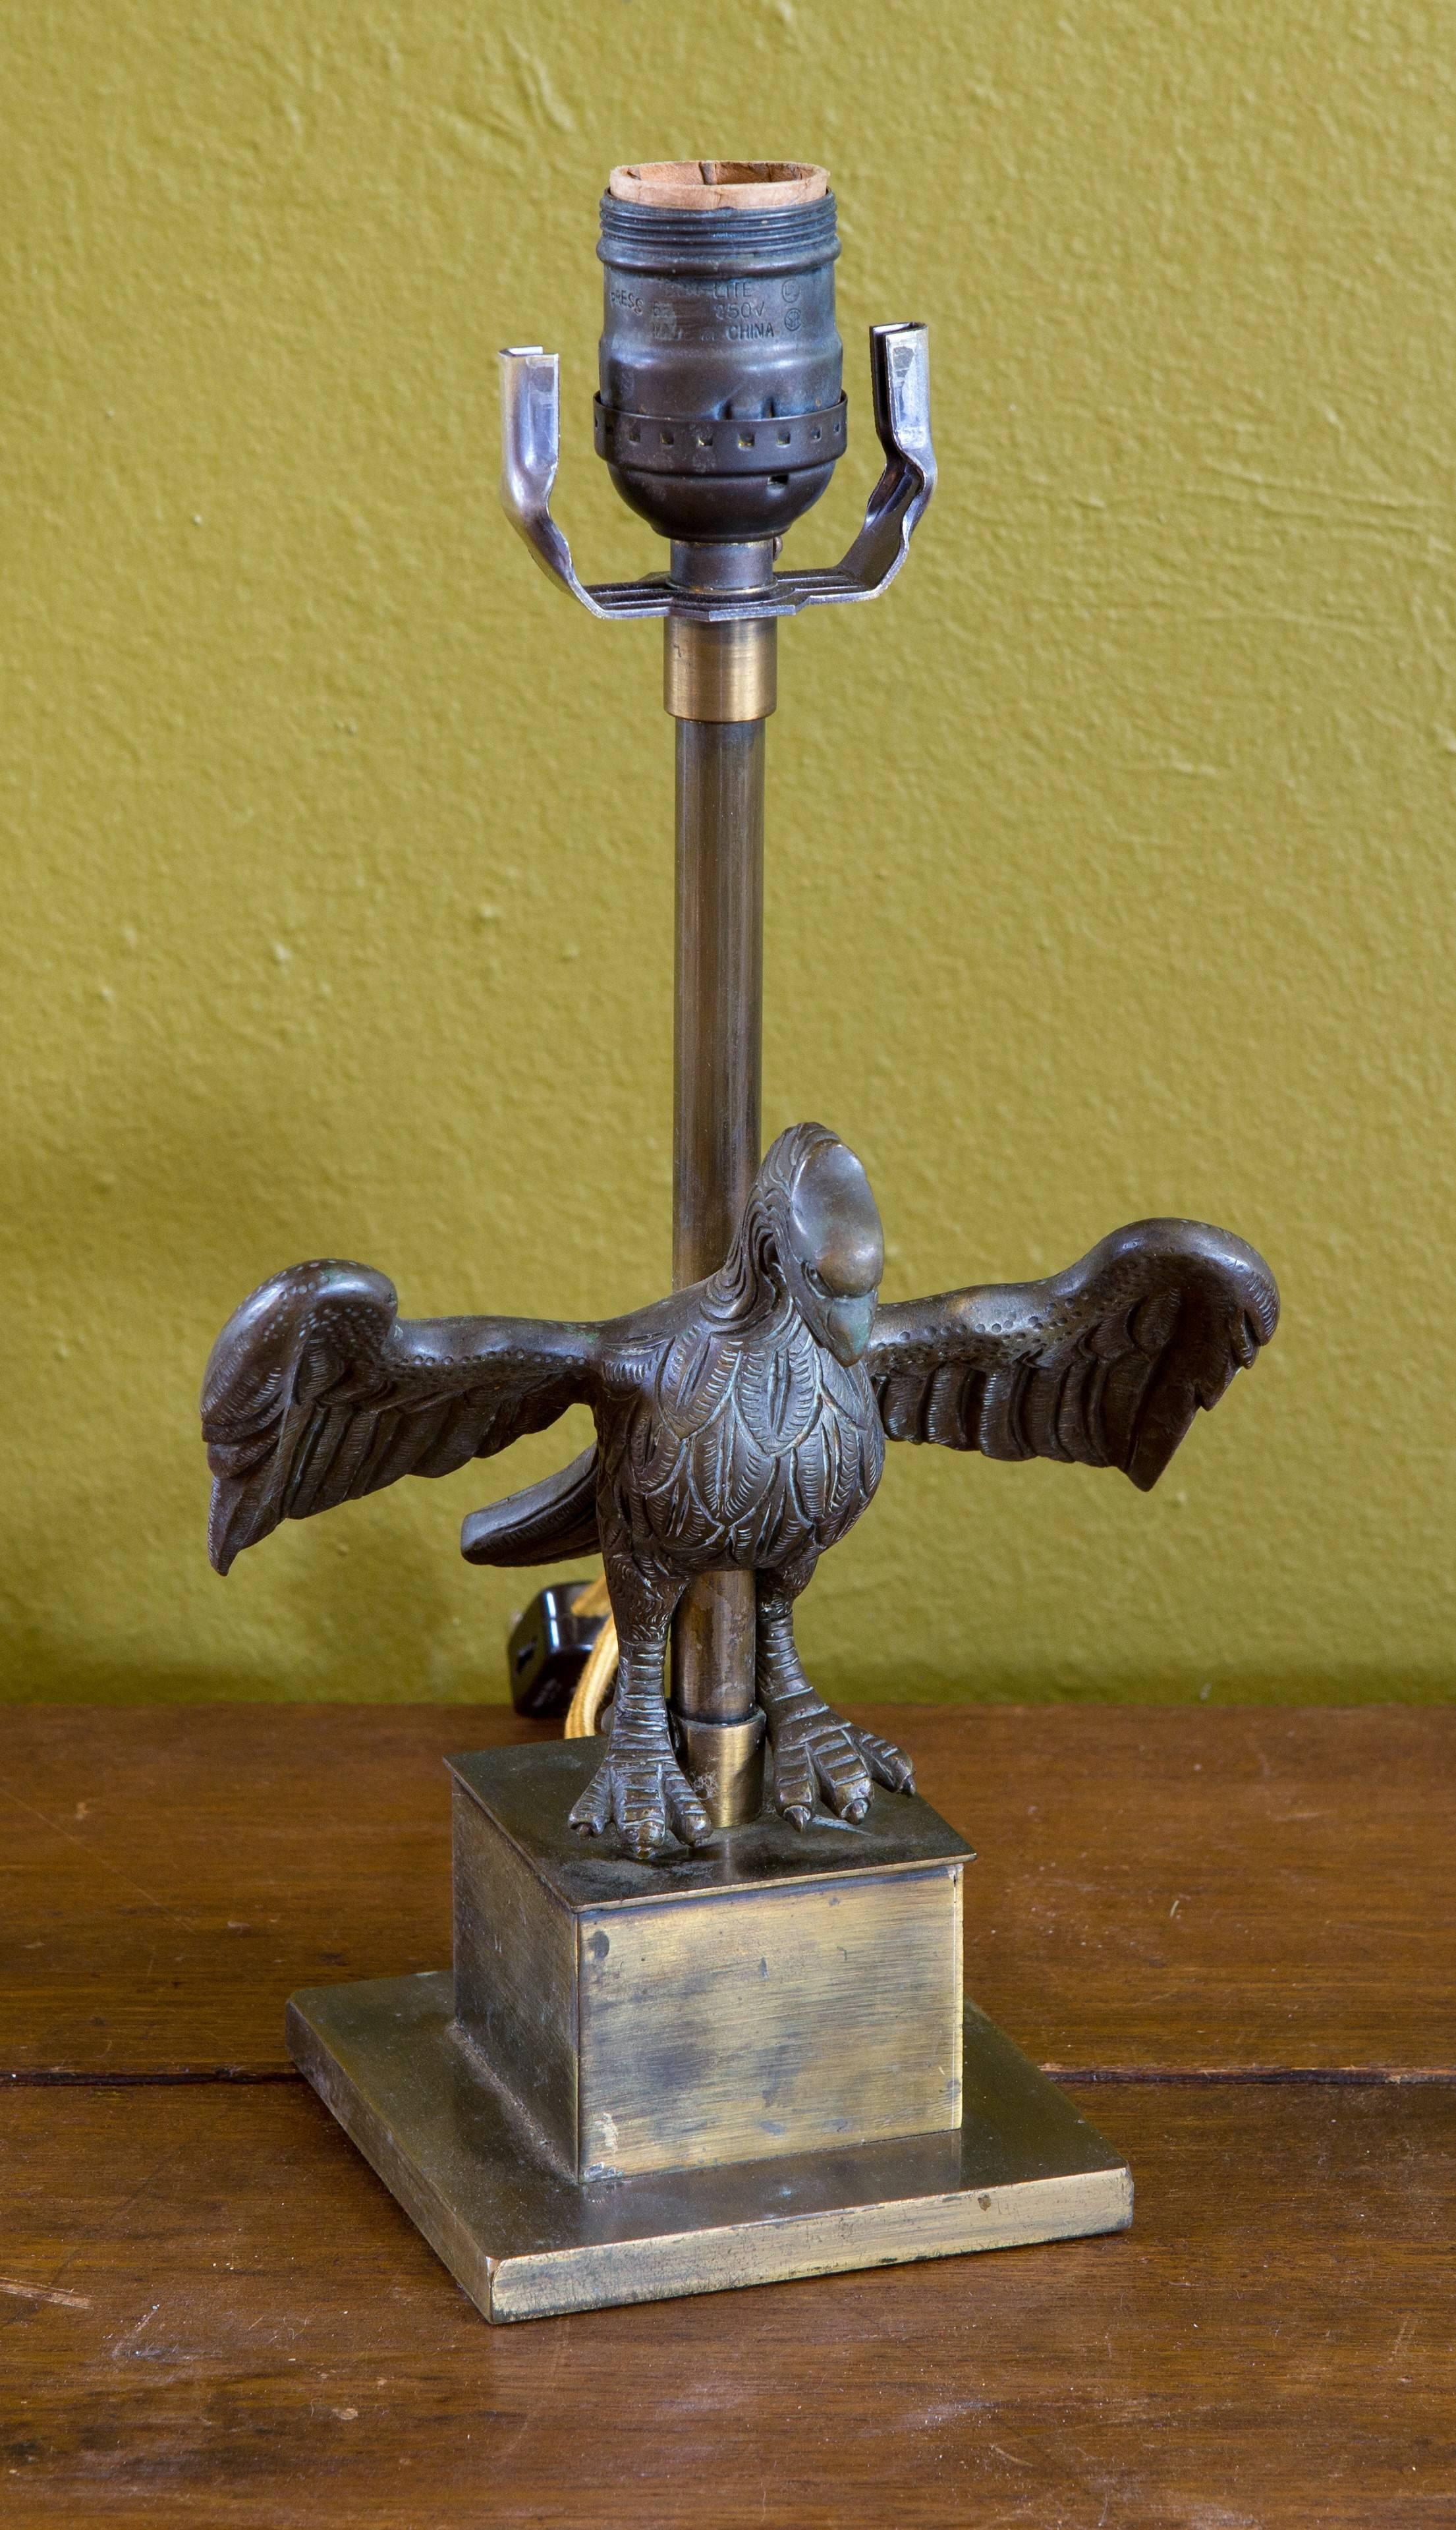 Petite one- of-a-kind bronze eagle table lamp, circa 1930s. Would be great for a study or on a small desk. Quite charming and of very nice quality. Would also be interesting tucked into a bookshelf.

He is just so charming and different.

It has